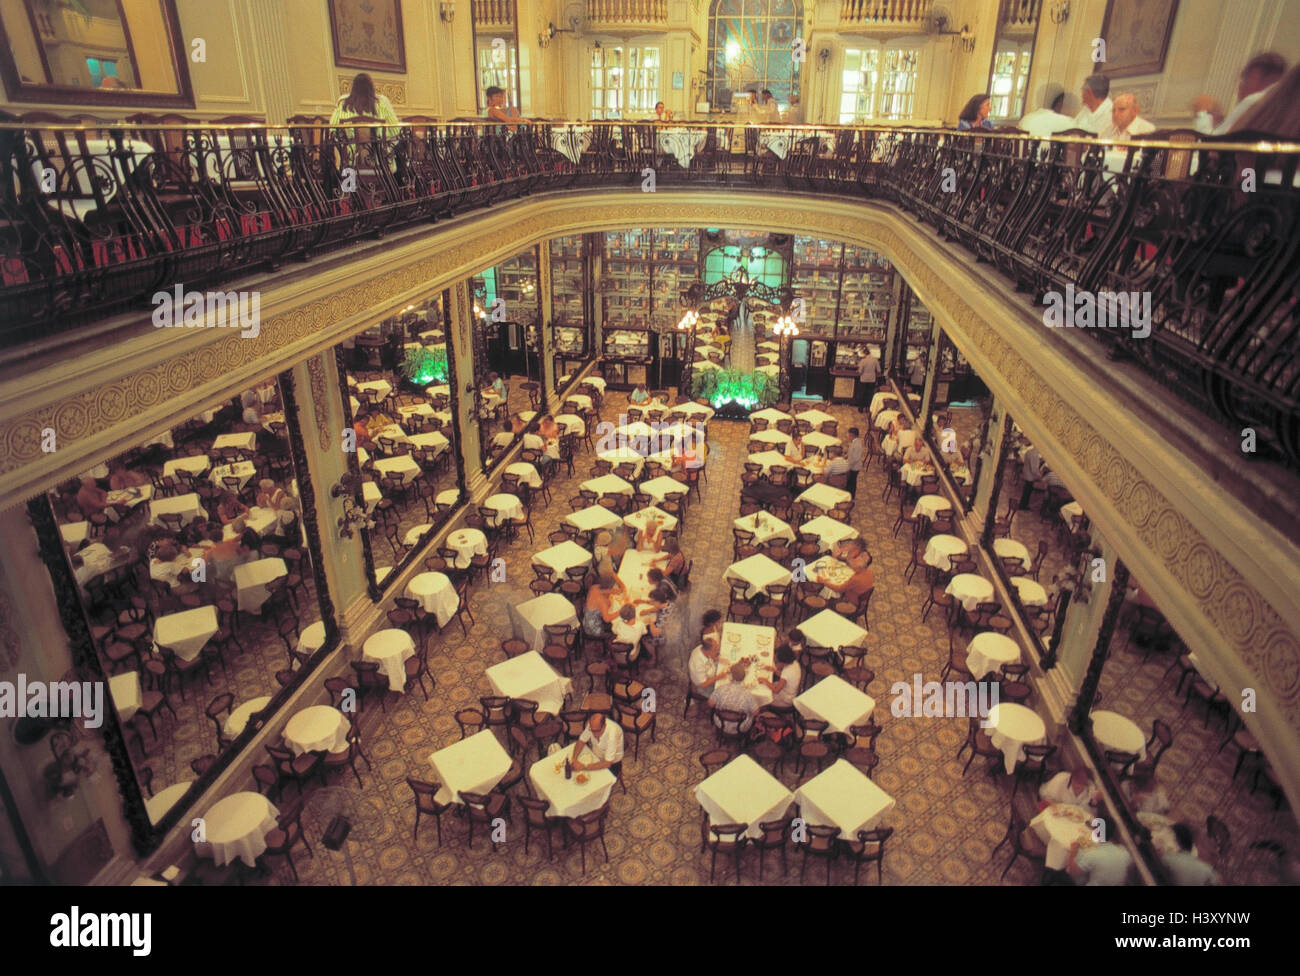 Brazil, Rio de Janeiro, Flamengo, cafe, guests, from above, Rio, part town, inside, bar, 2-storied, tables, cafe tables, balcony, gallery, tourist, tourism Stock Photo